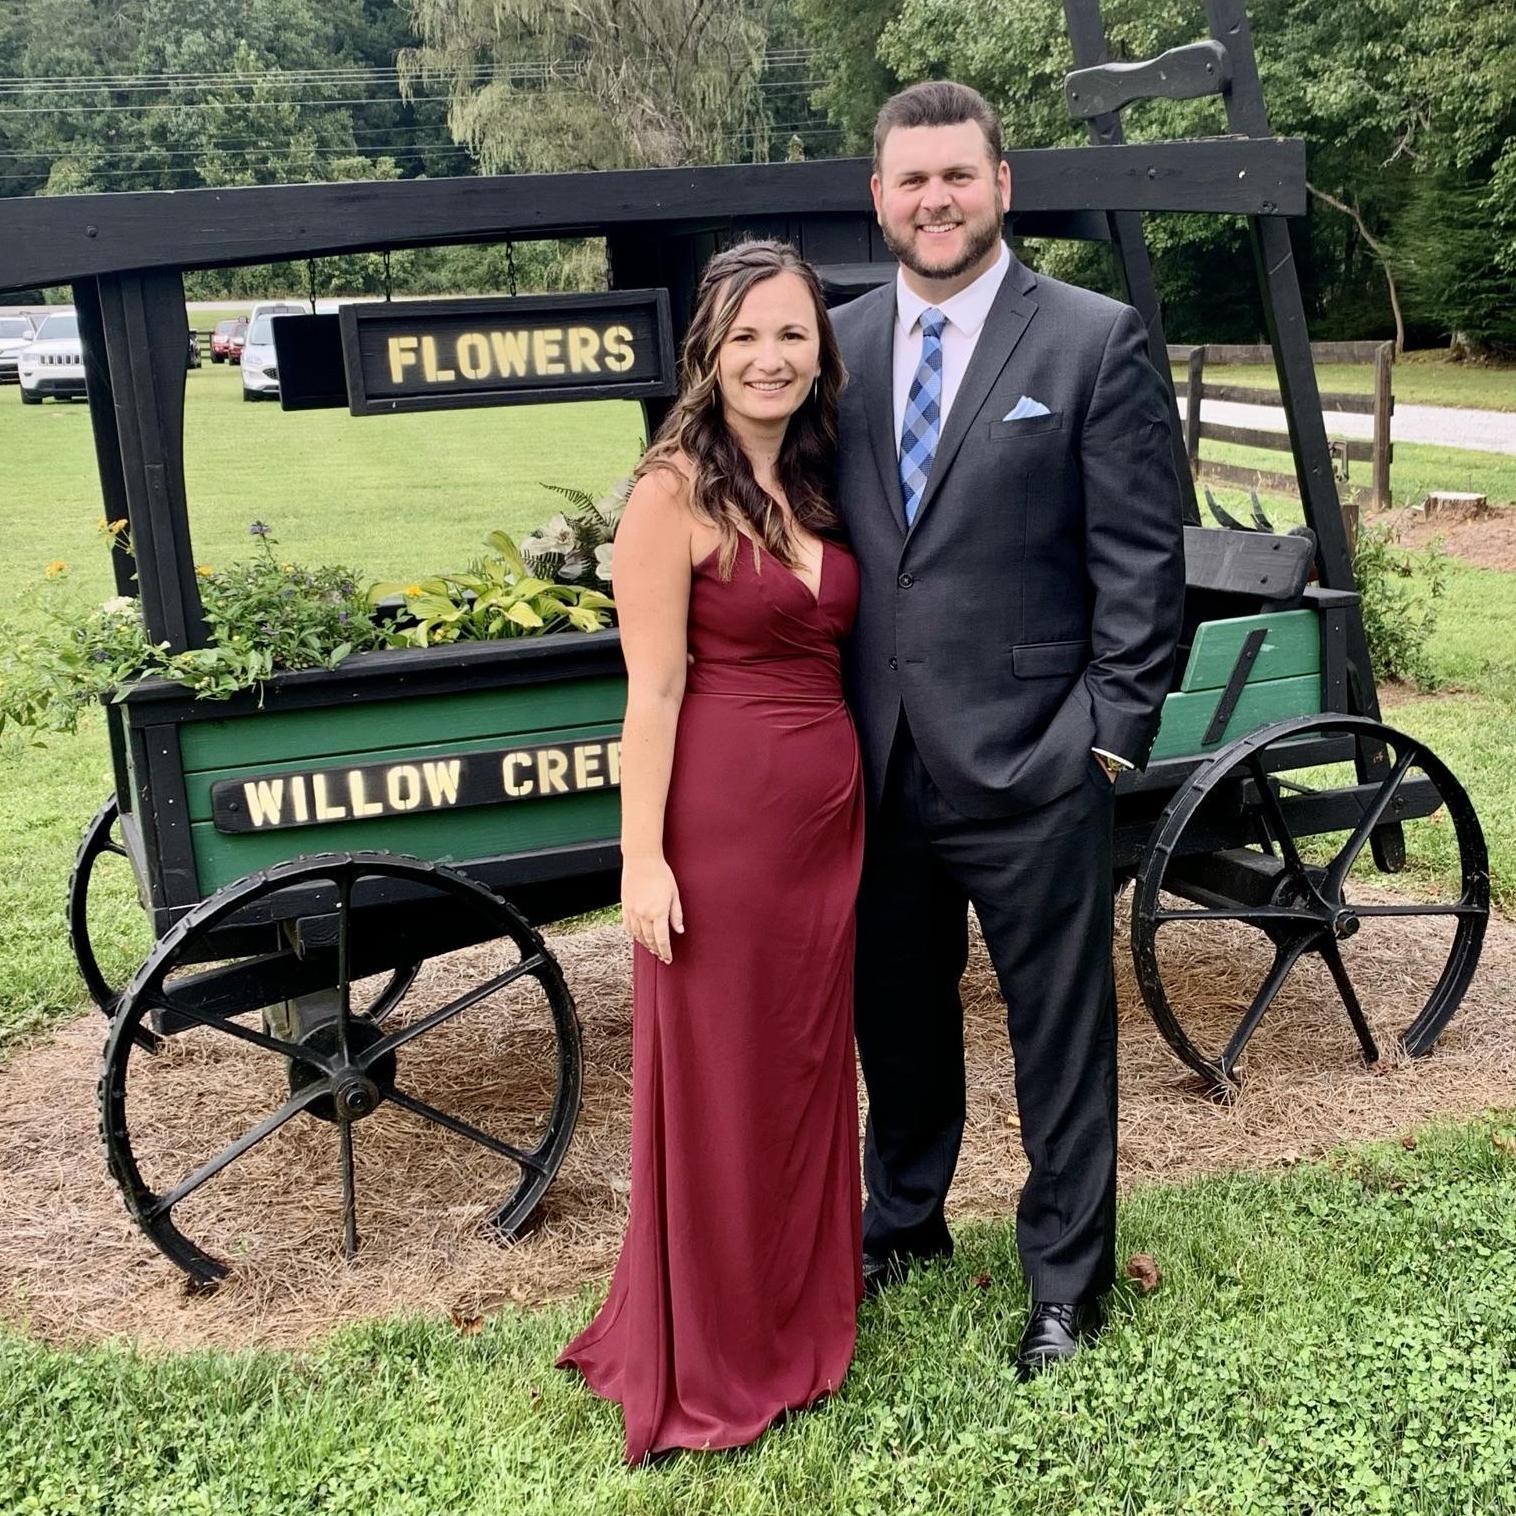 I was so lucky to be able to be a part of Melanie & Graeme Harris’s wedding. This was also Colt's first time meeting a lot of my college friends & we had a blast celebrating with everyone.